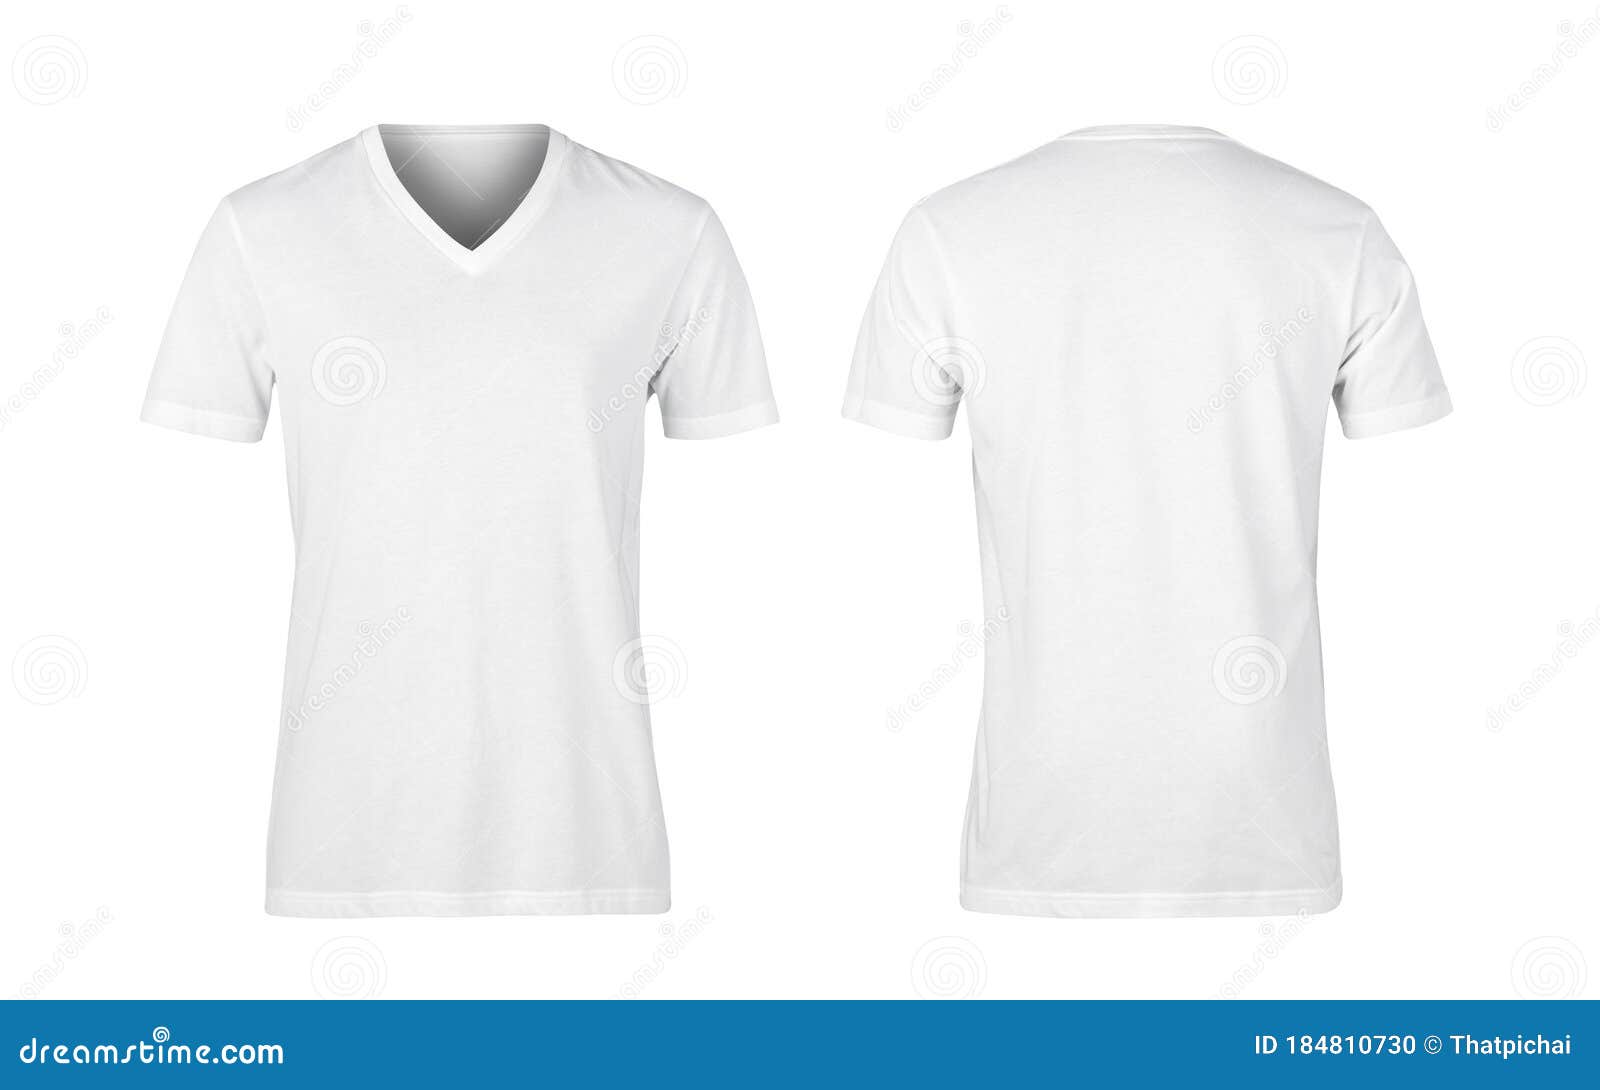 White Woman V-nect T-shirts Front And Back Isolated On White Background ...